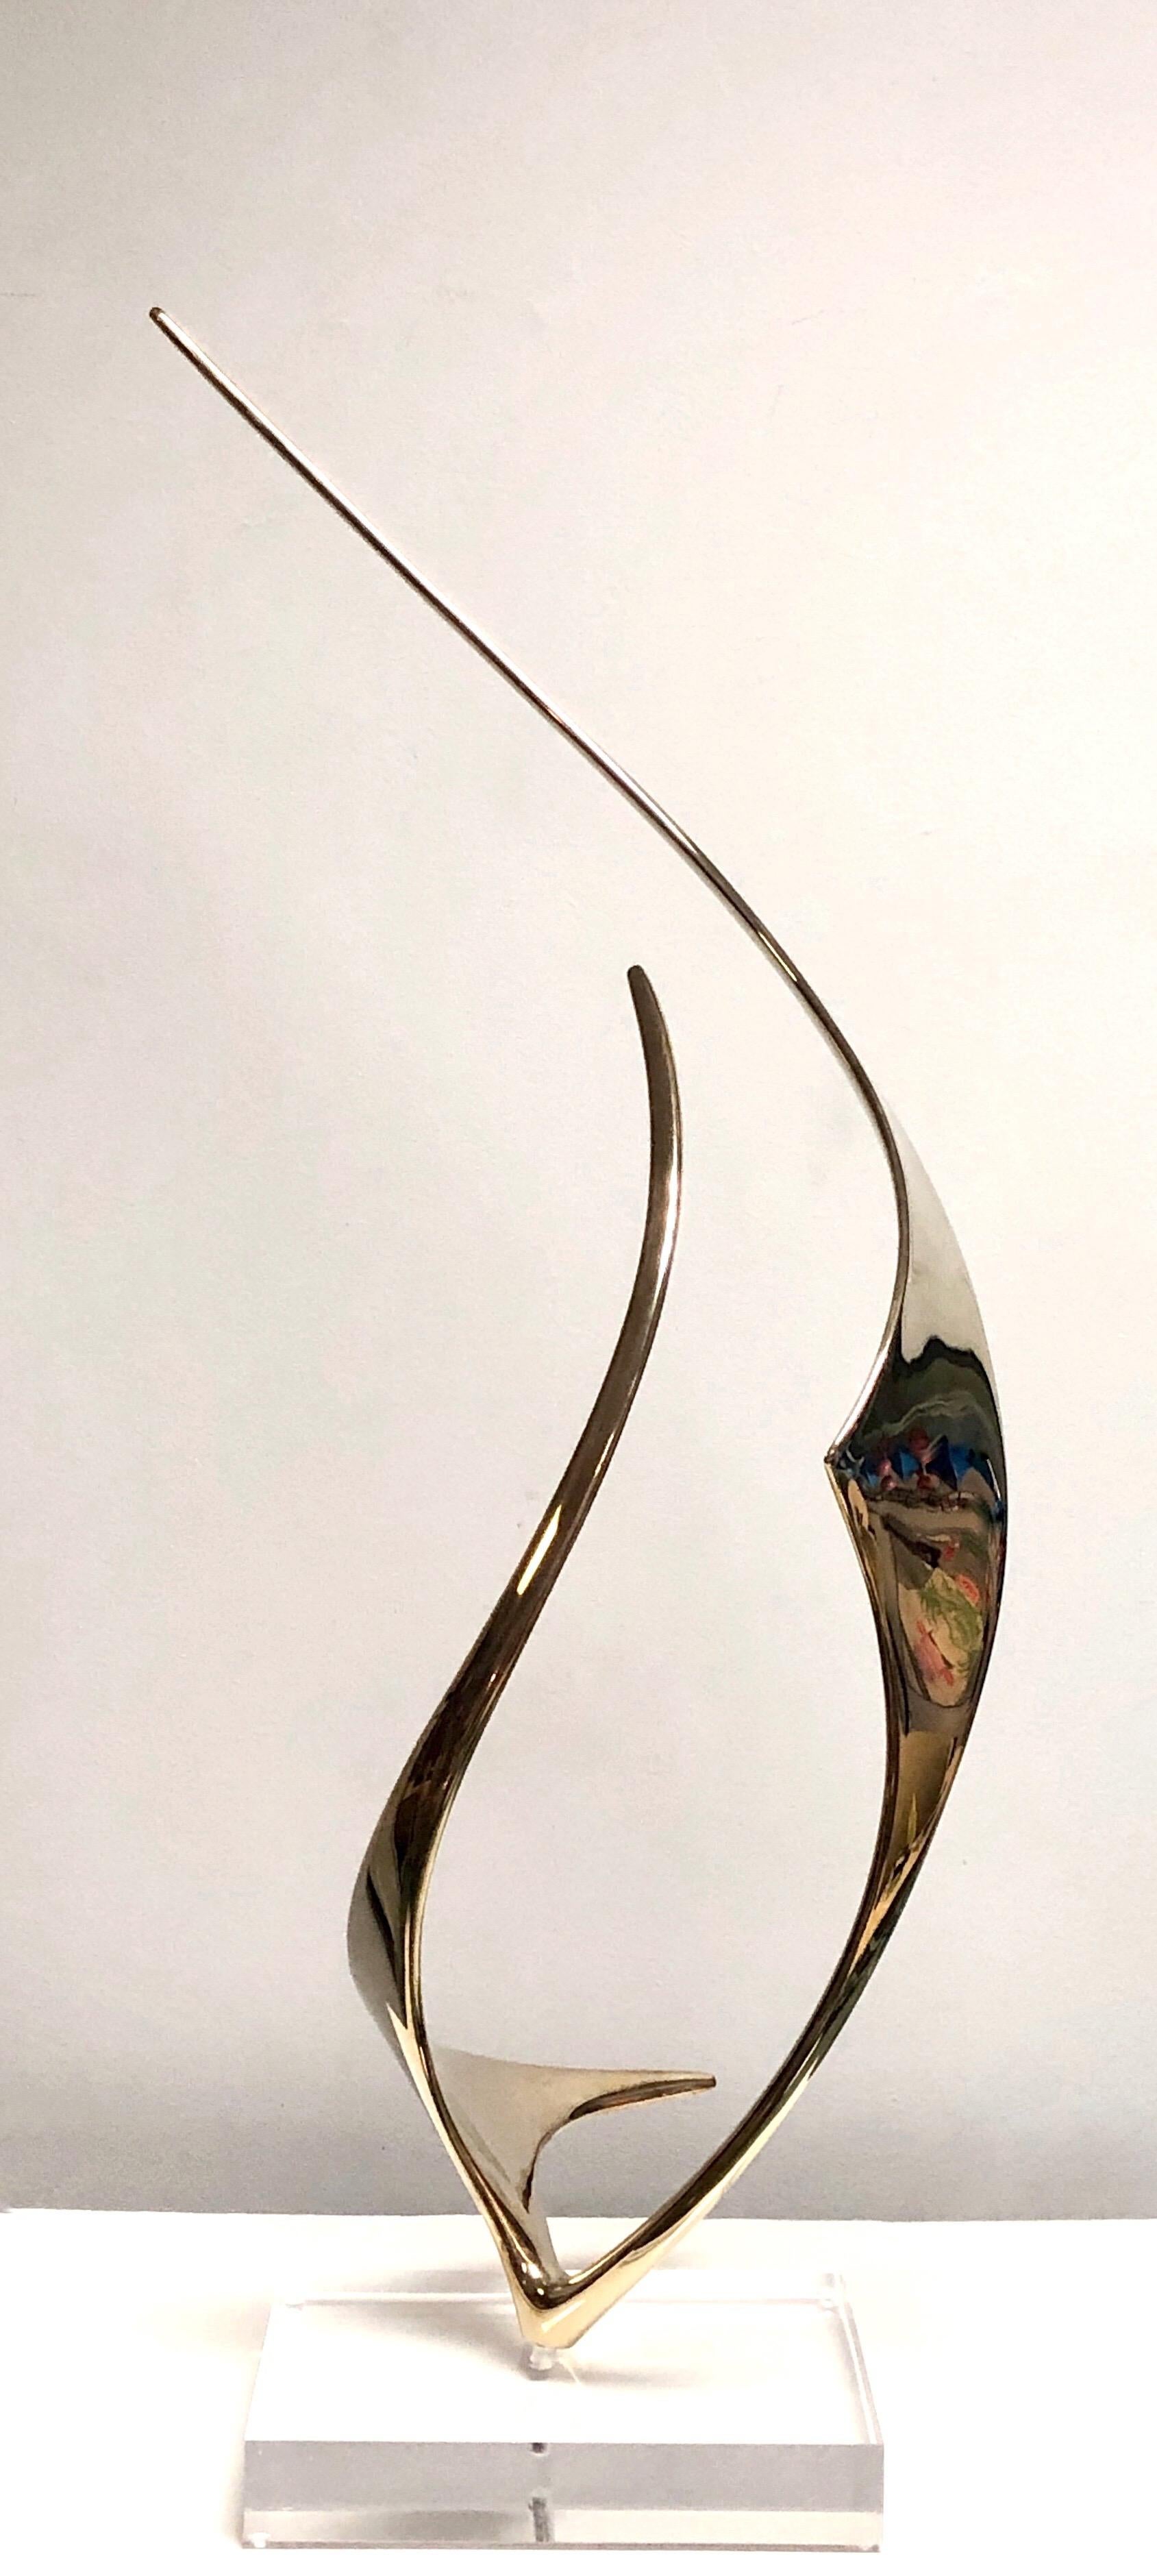 A large bronze sculpture by Lou Pearson and Robbie Robins. On a thick Lucite base where it swivels. Signed and numbered 23 of 36, and dated 1995.

Louis Pearson was an abstract modern sculptor born to Swedish immigrants residing in Wallace, Idaho,